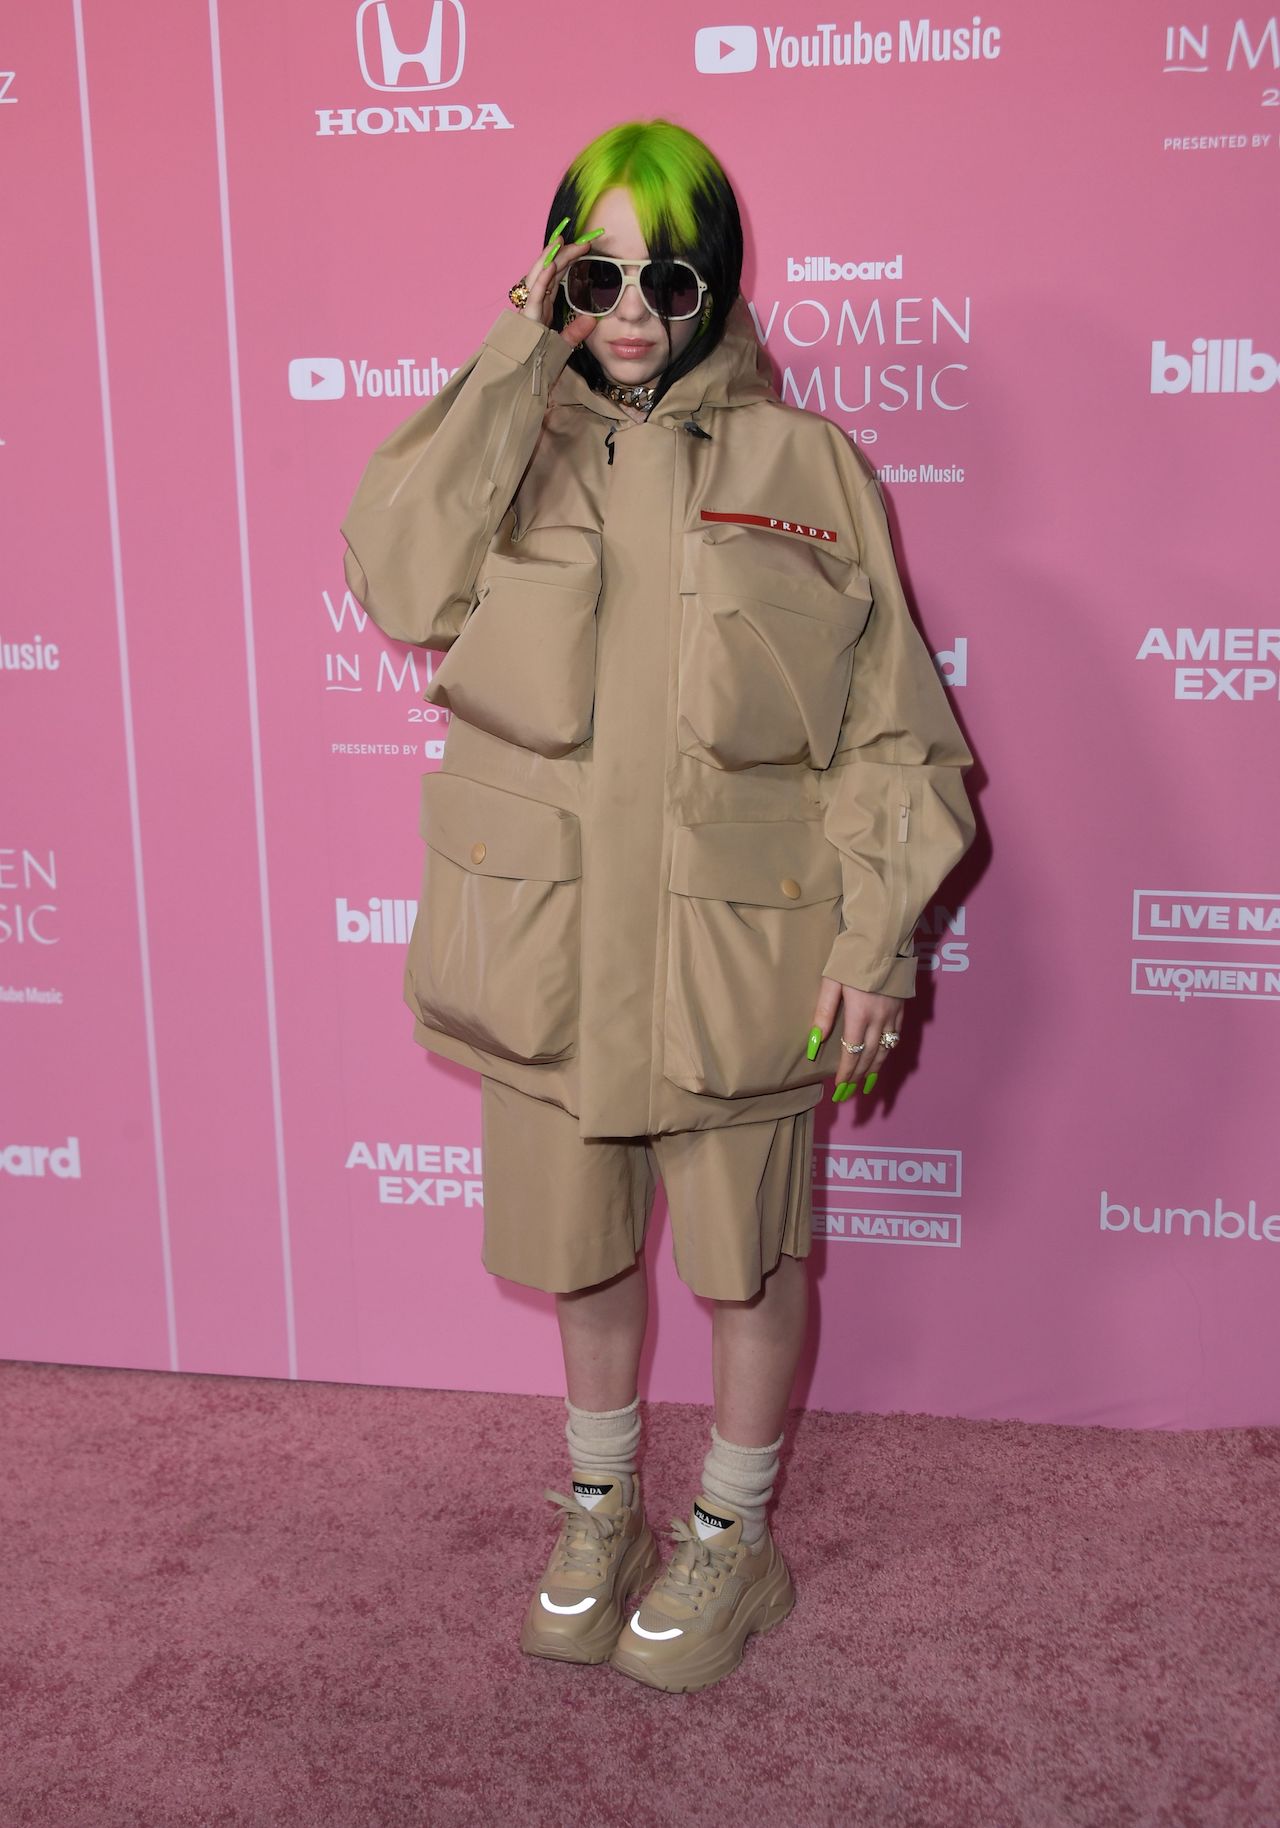 US singer/songwriter honoree Billie Eilish arrives for Billboard's 2019 Woman of the Year at the Hollywood Palladium in Los Angeles on December 12, 2019. - Billboard's 2019 Woman of the Year is Billie EIlish.